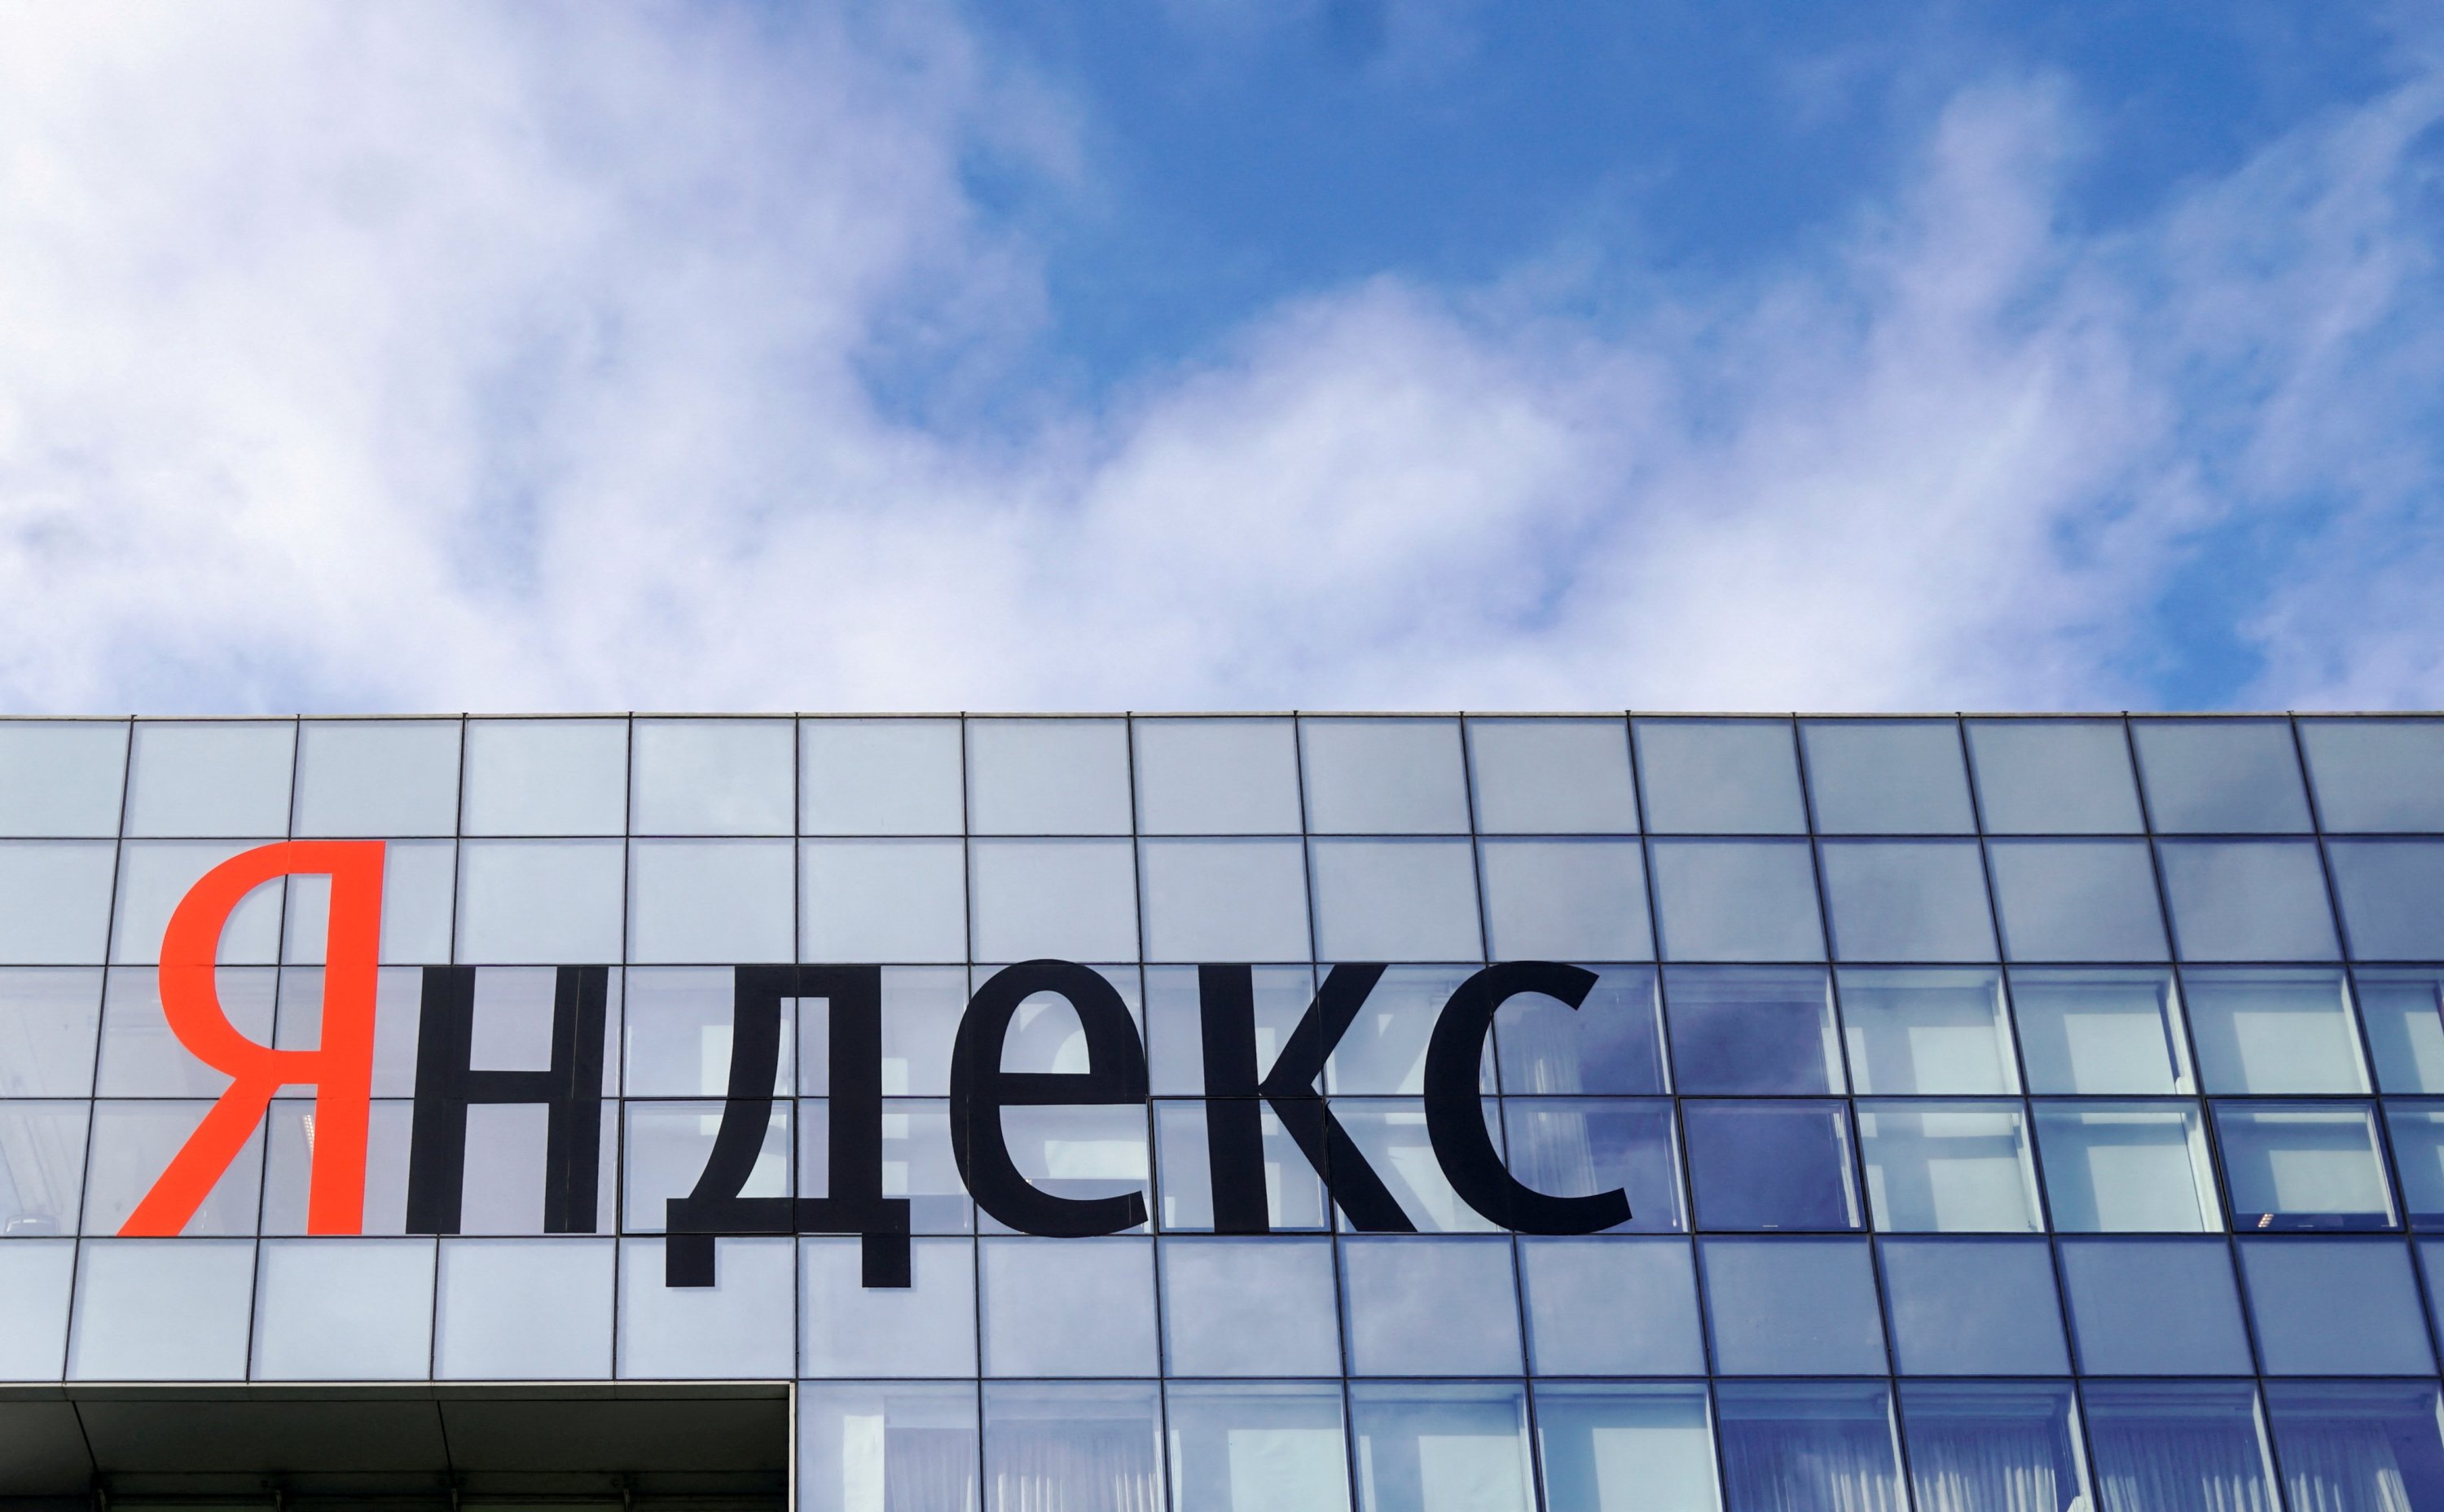 Russia tightens media fist also sells Yandex homepage, news to compete with VK